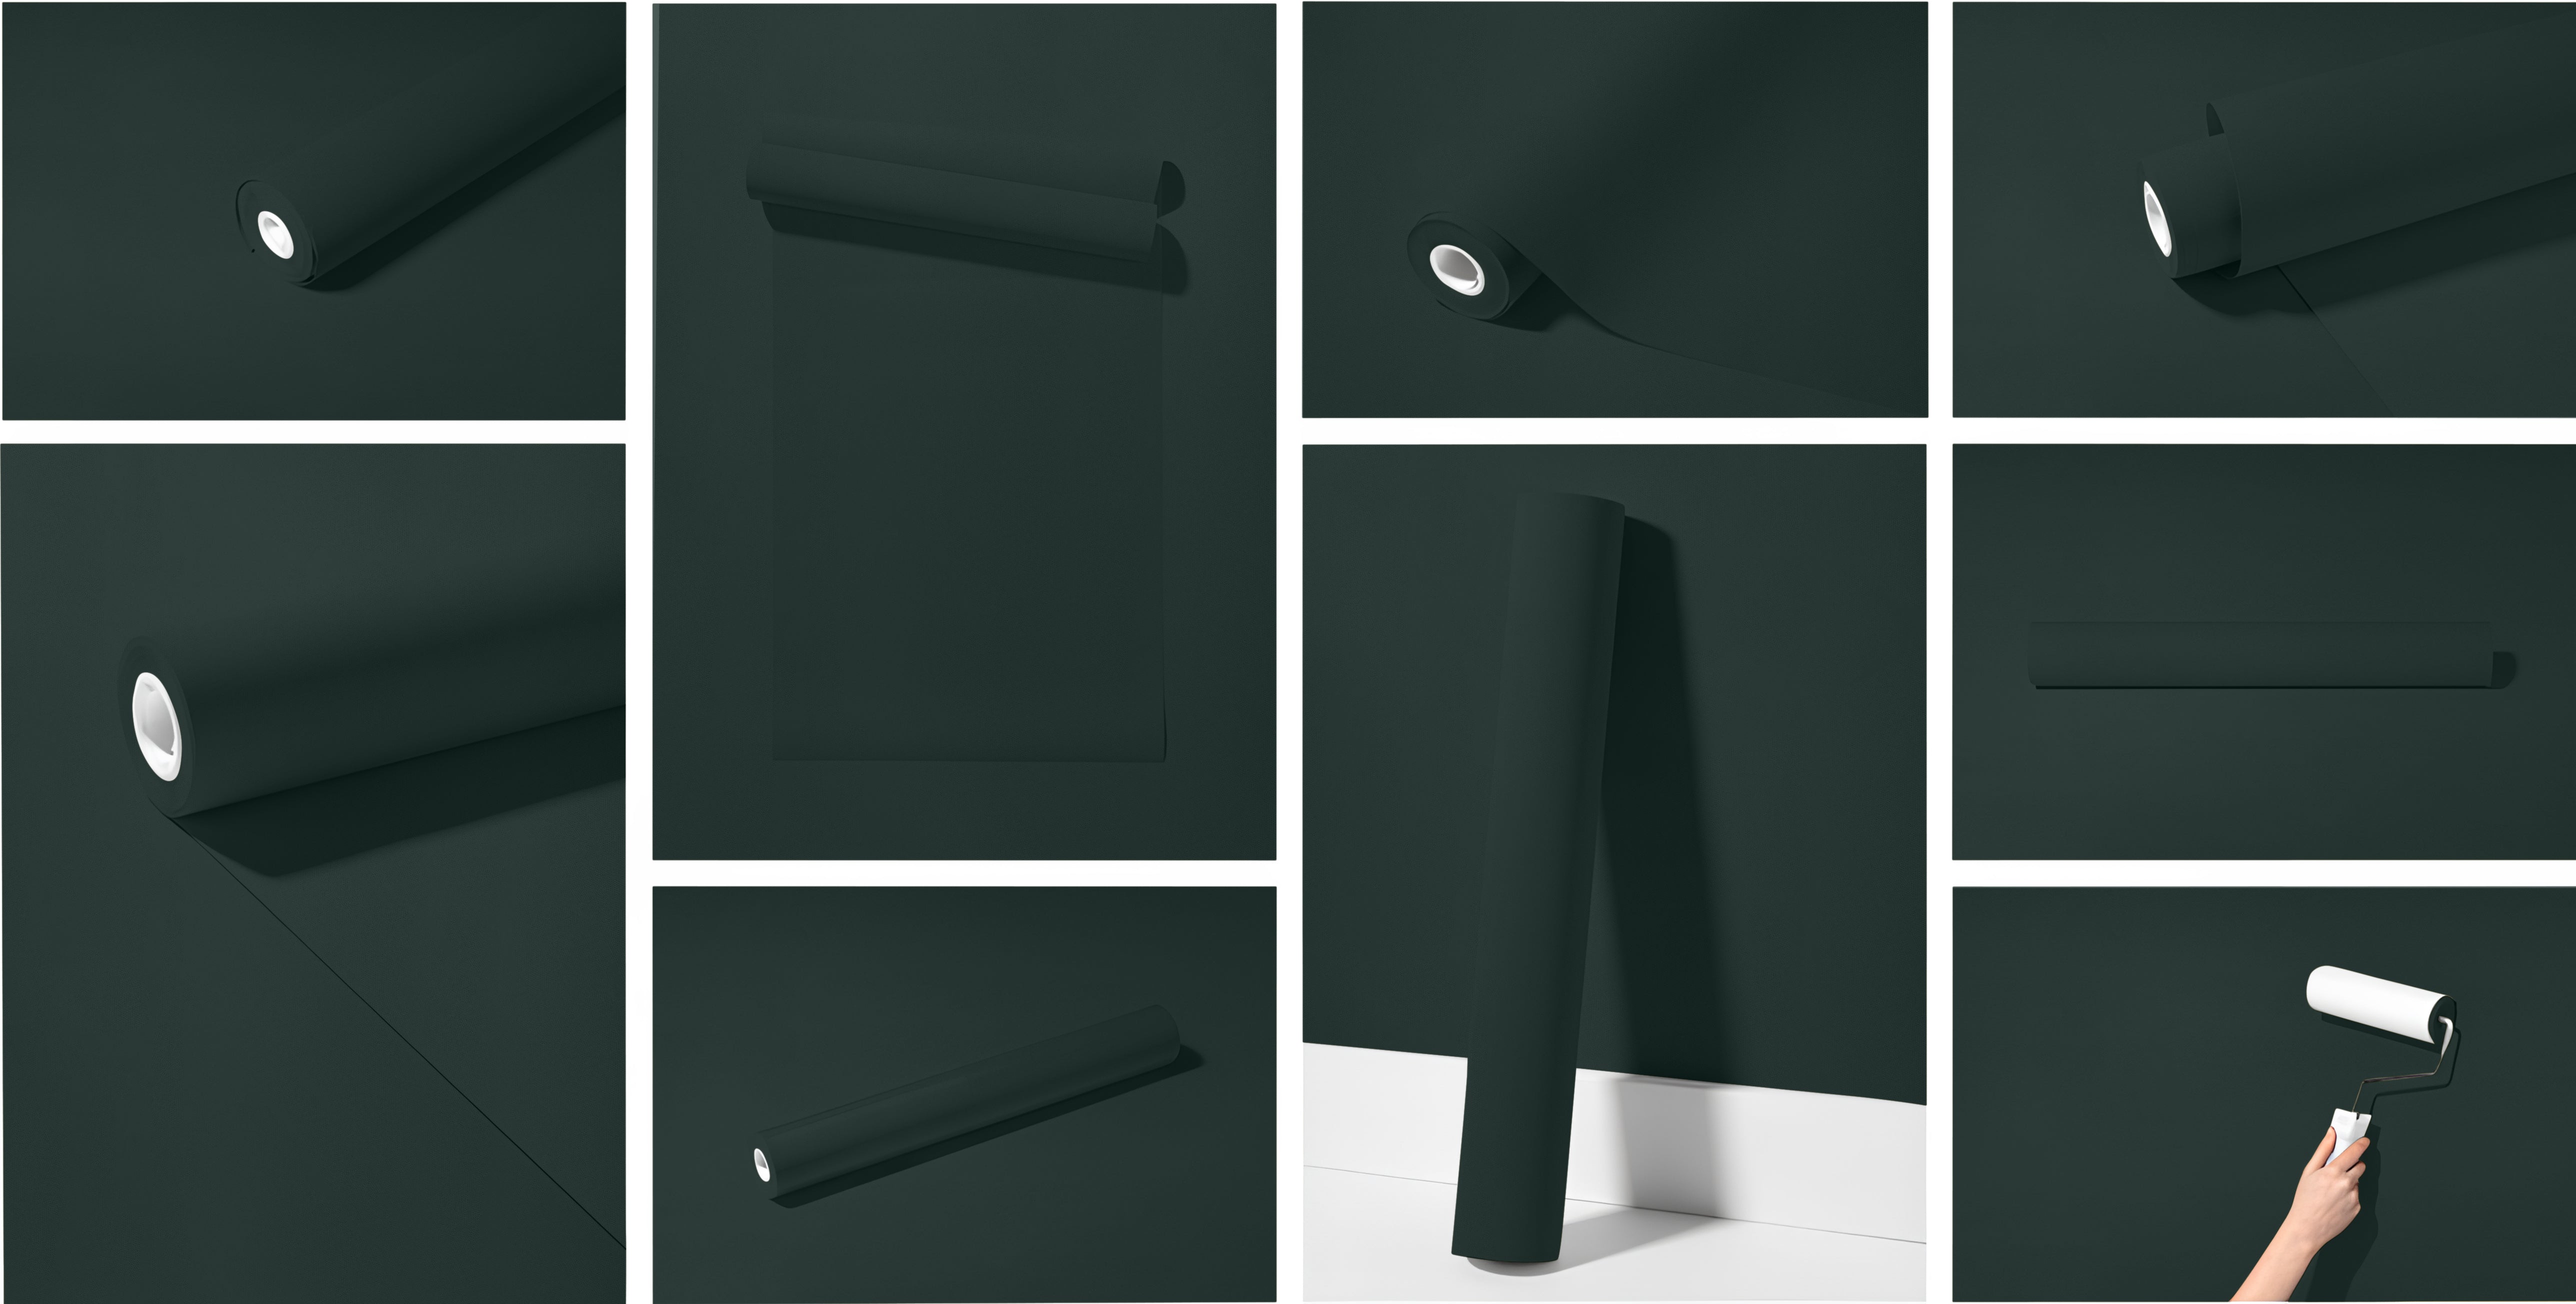 Peel & Stick Removable Re-usable Paint - Color RAL 6012 Black Green - offRAL™ - RALRAW LLC, USA